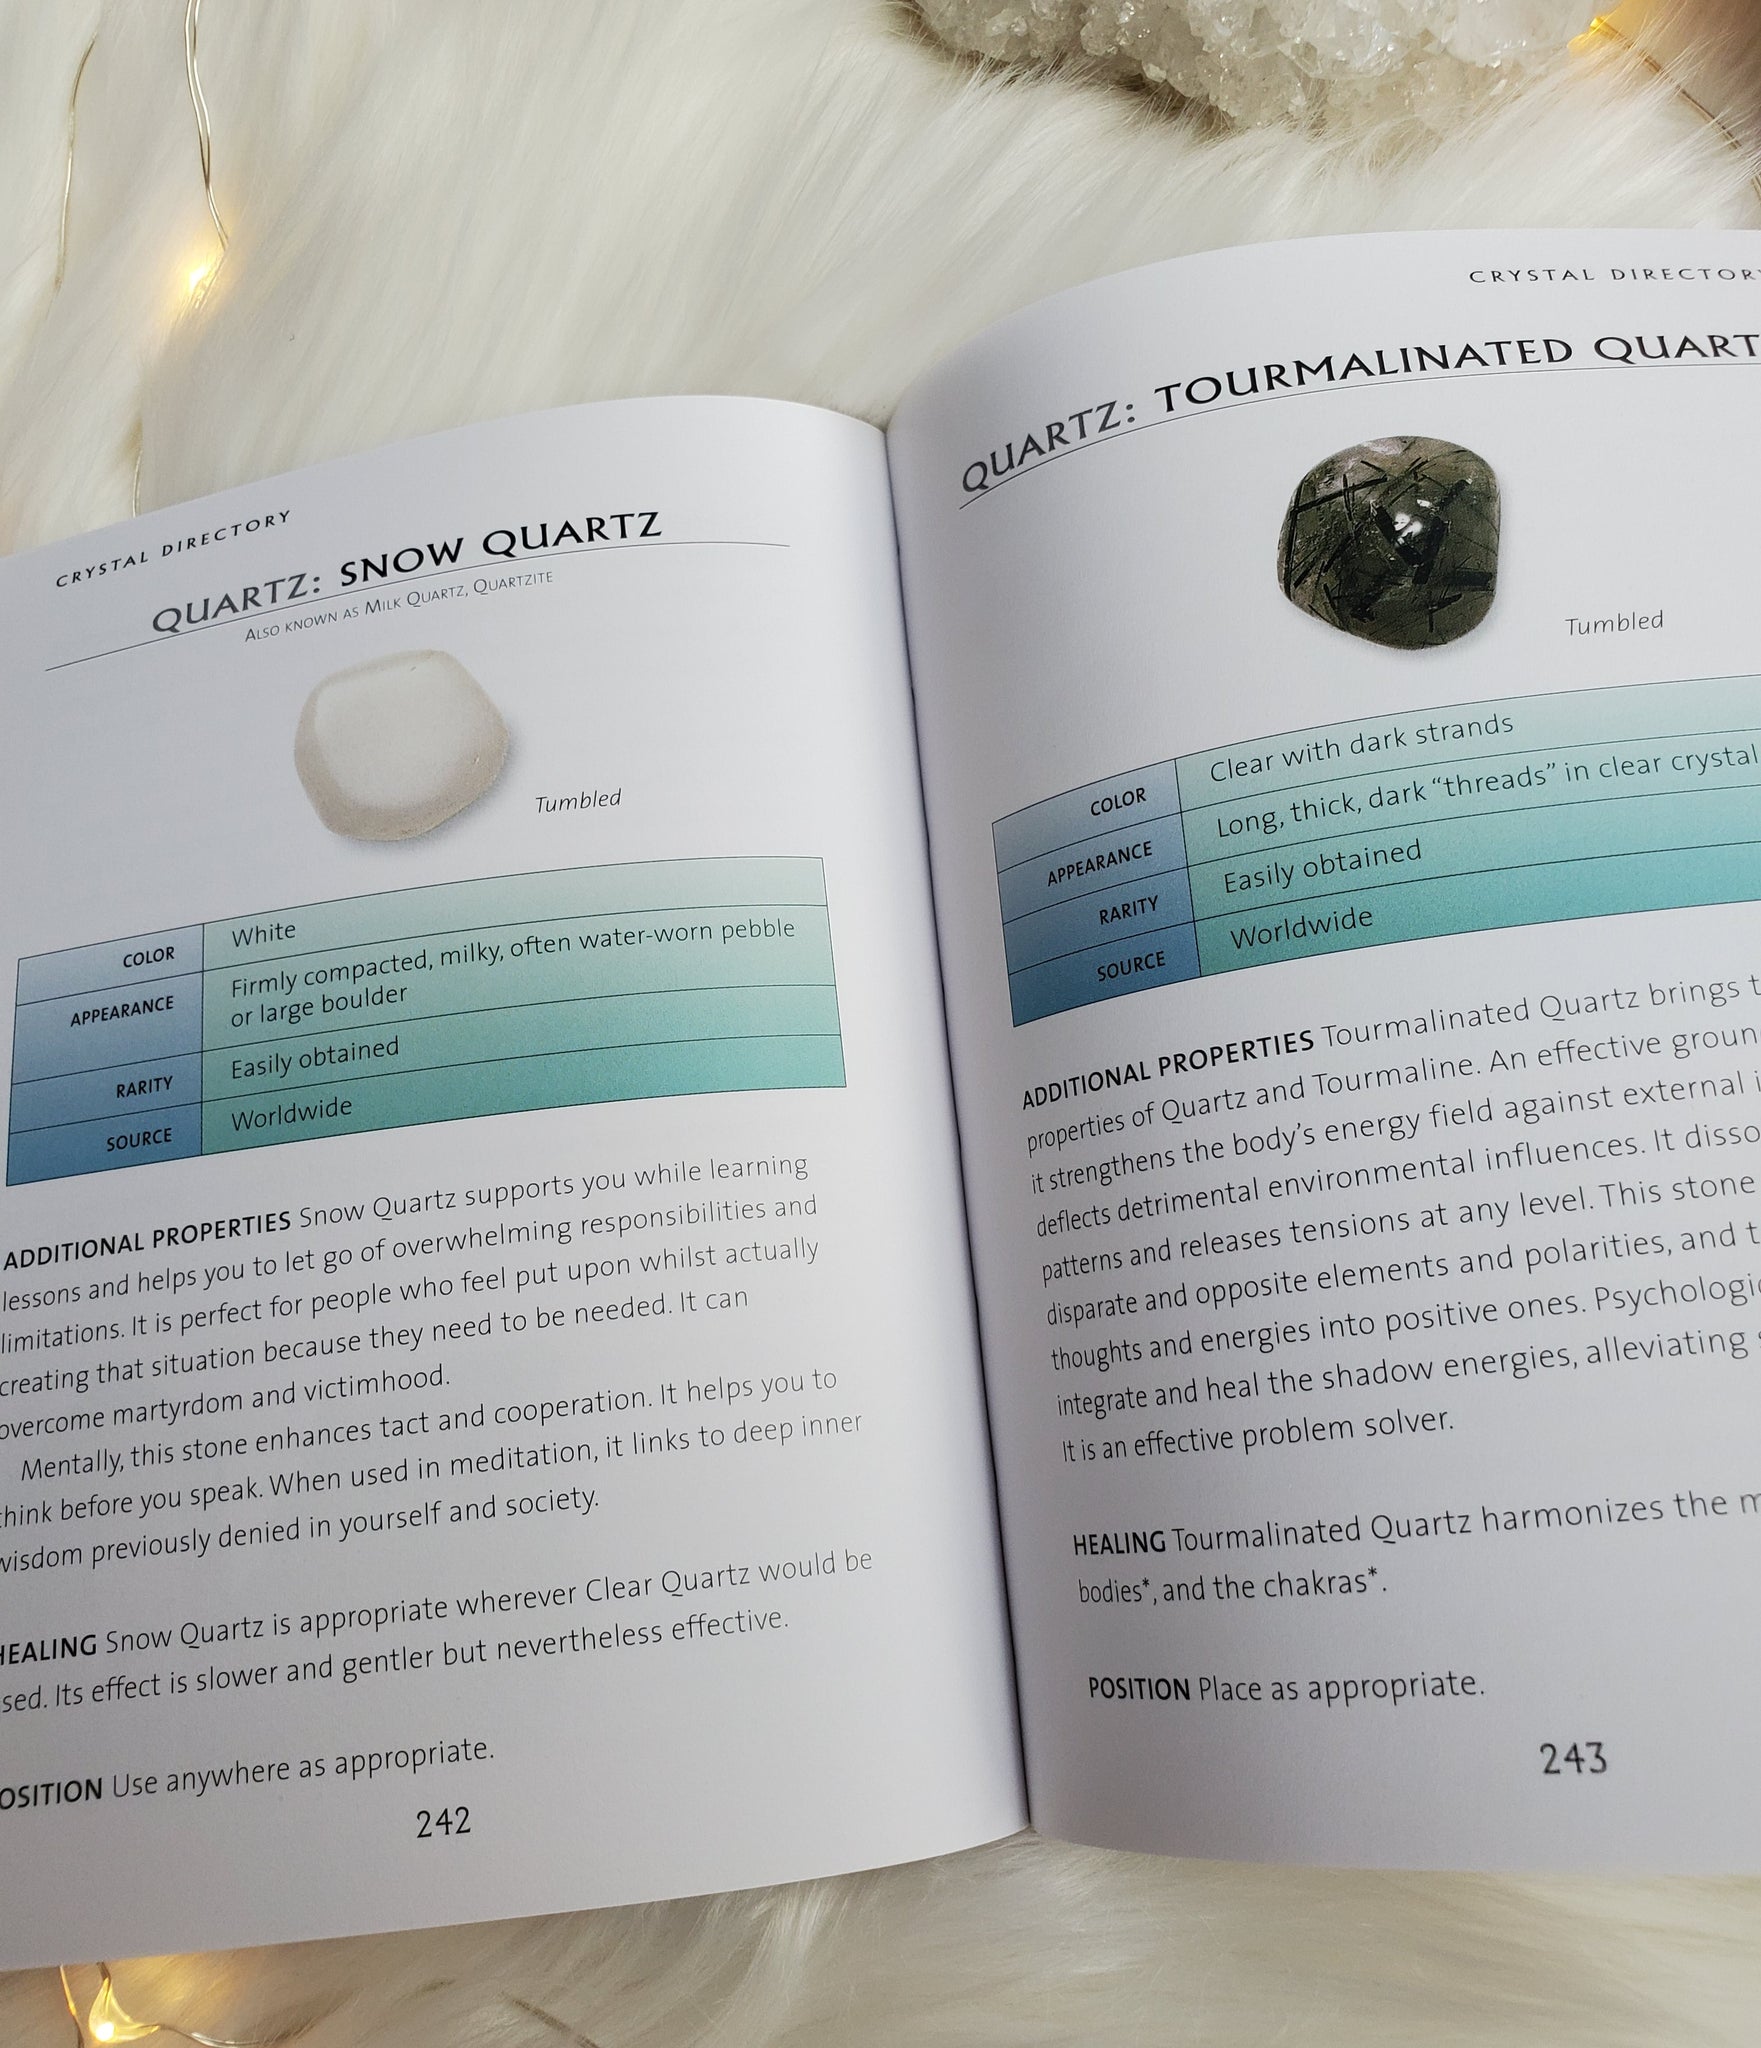 Crystal Bible - A Definitive Guide To Crystals